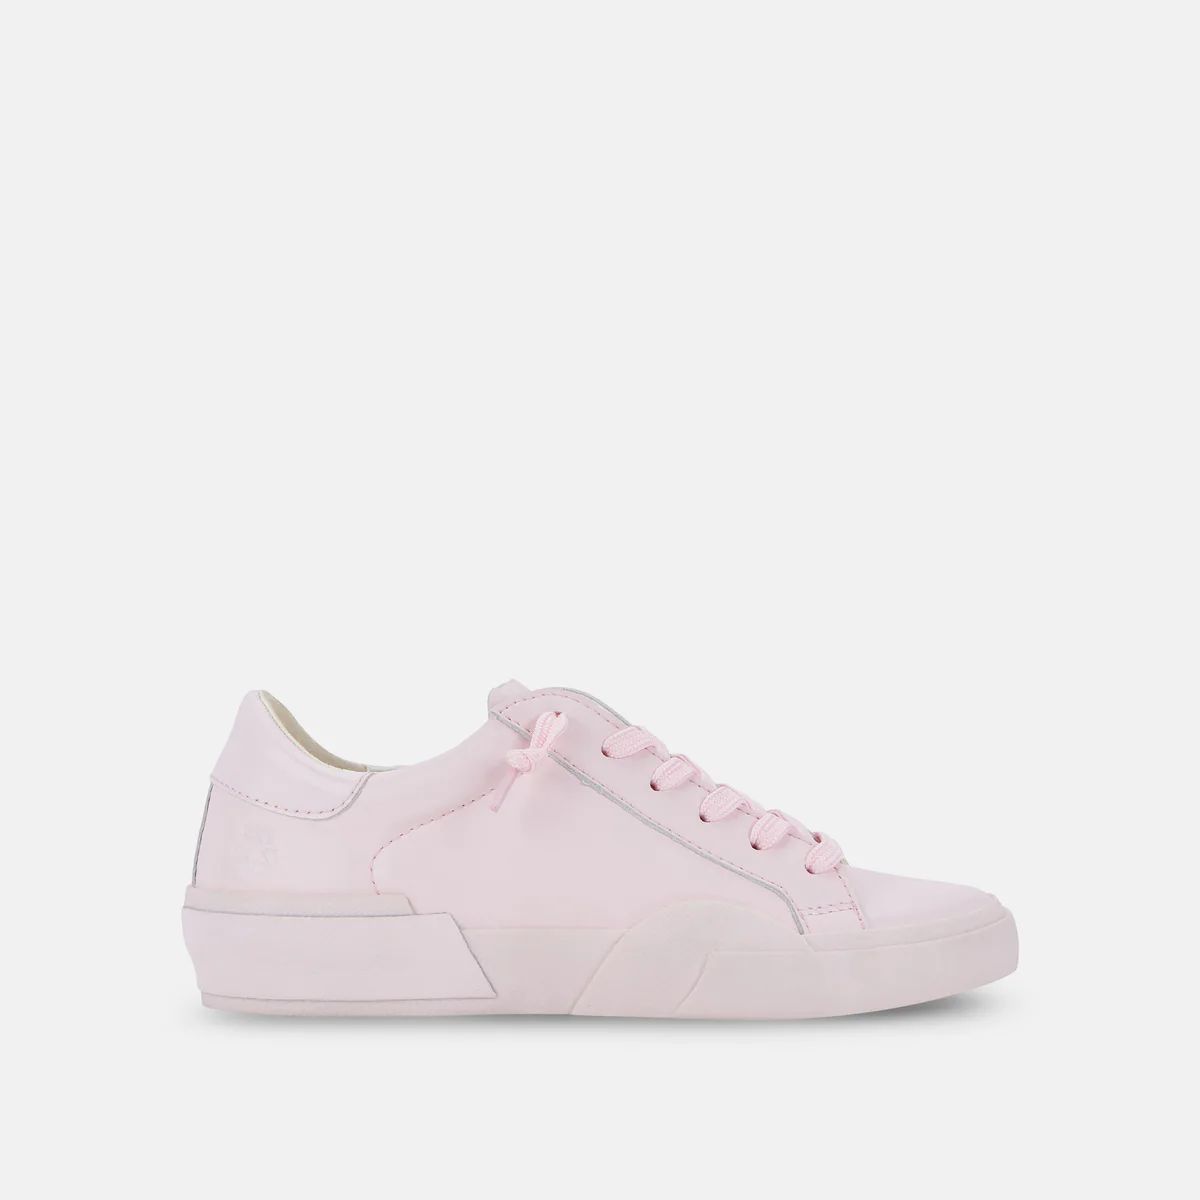 ZINA 360 SNEAKERS LIGHT PINK RECYCLED LEATHER | DolceVita.com